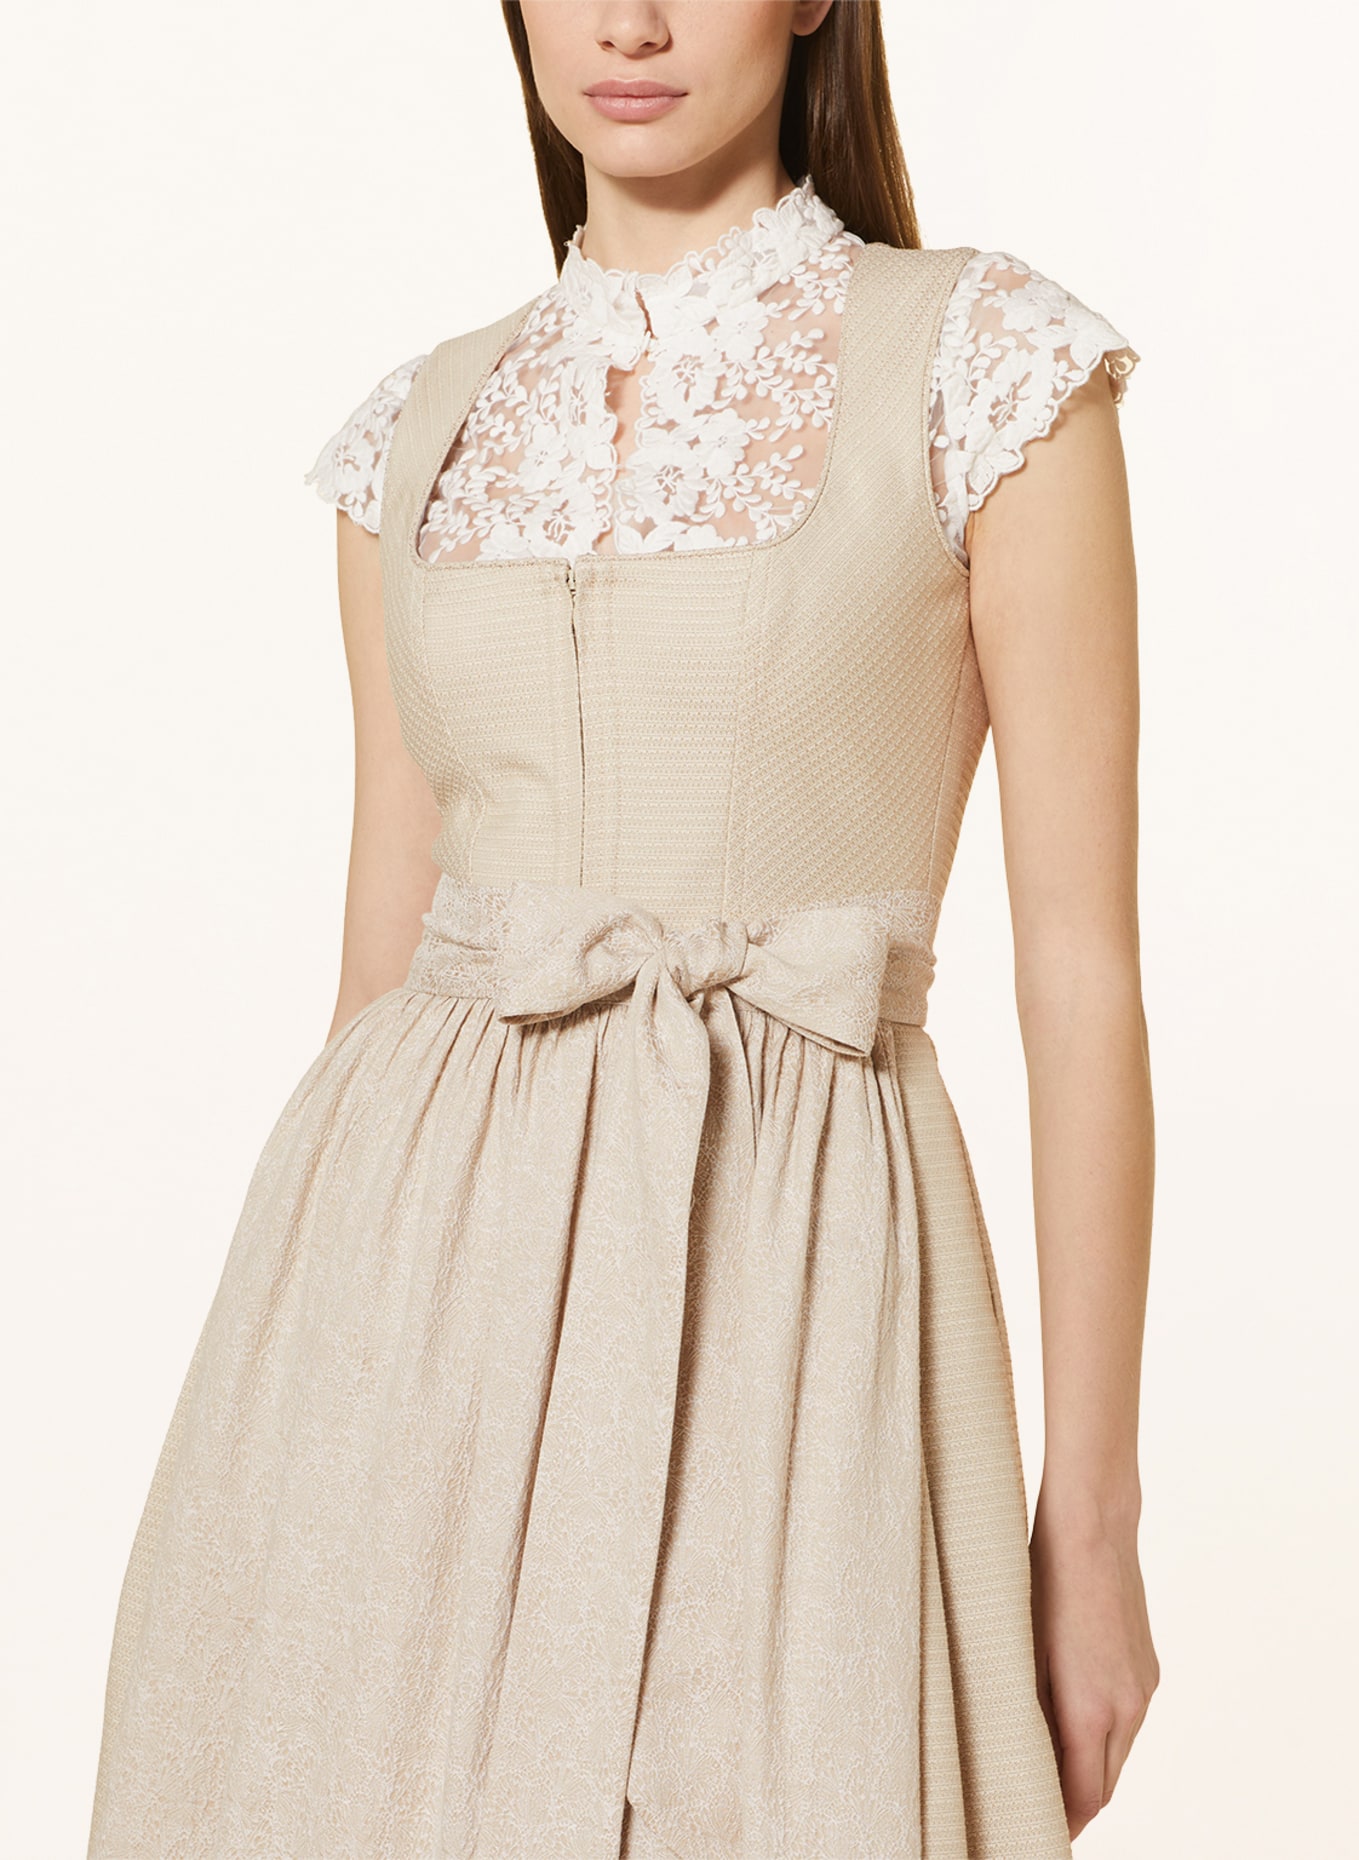 LIMBERRY Dirndl blouse ESTHER, Color: WHITE (Image 3)